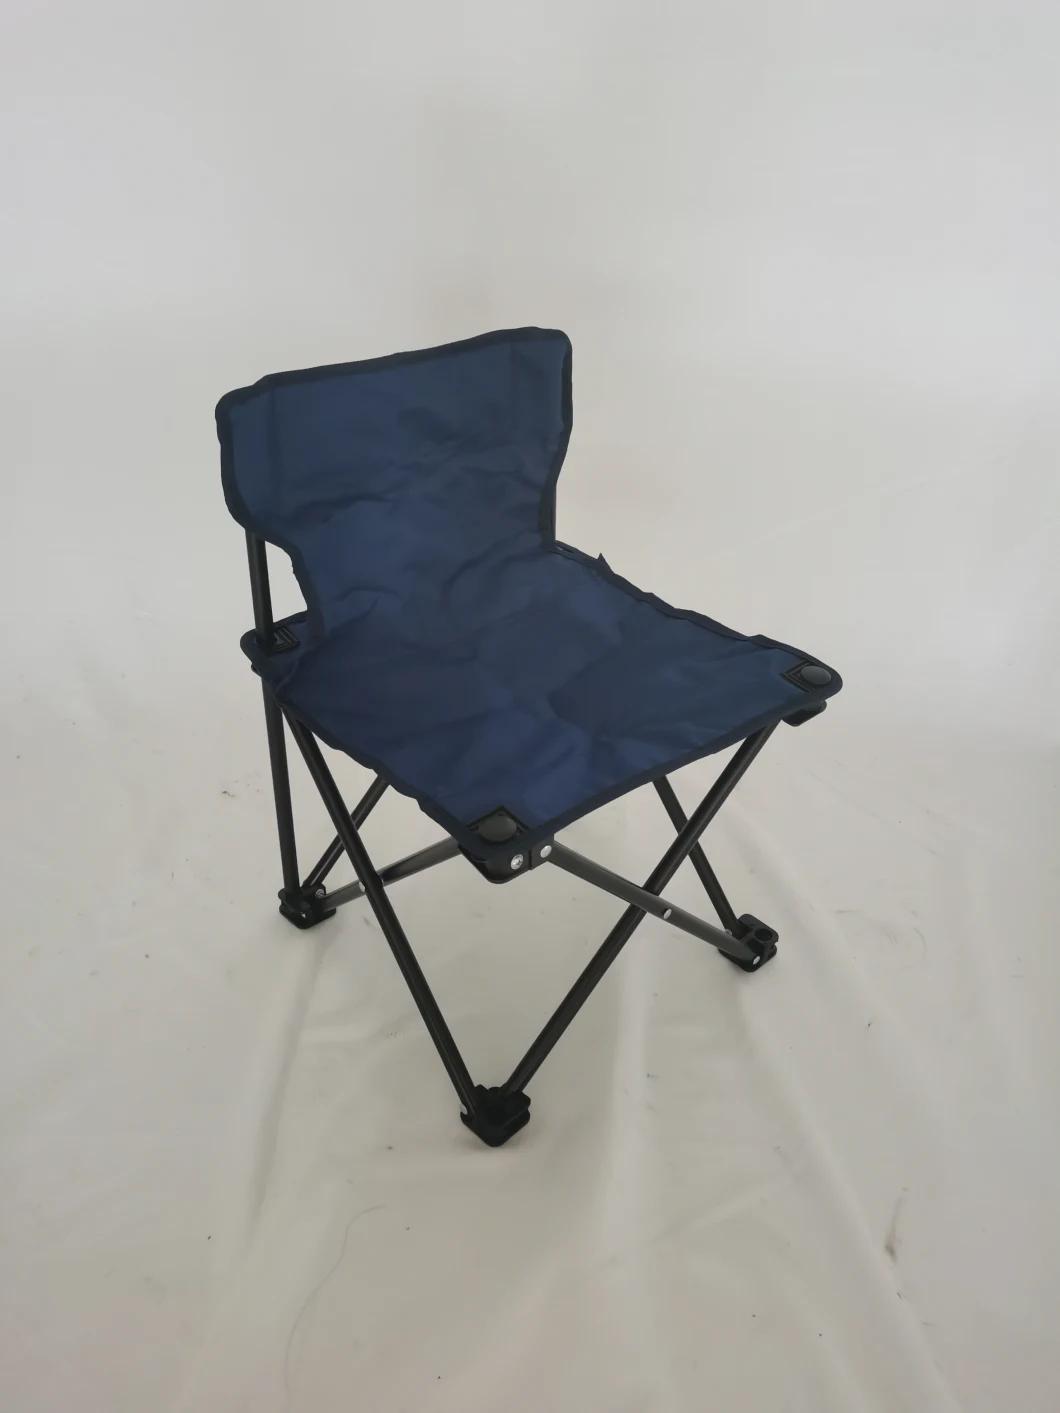 Classic Design Folding Camping Chair with Cooler Bag Foldable for Outdoor Camping Chair